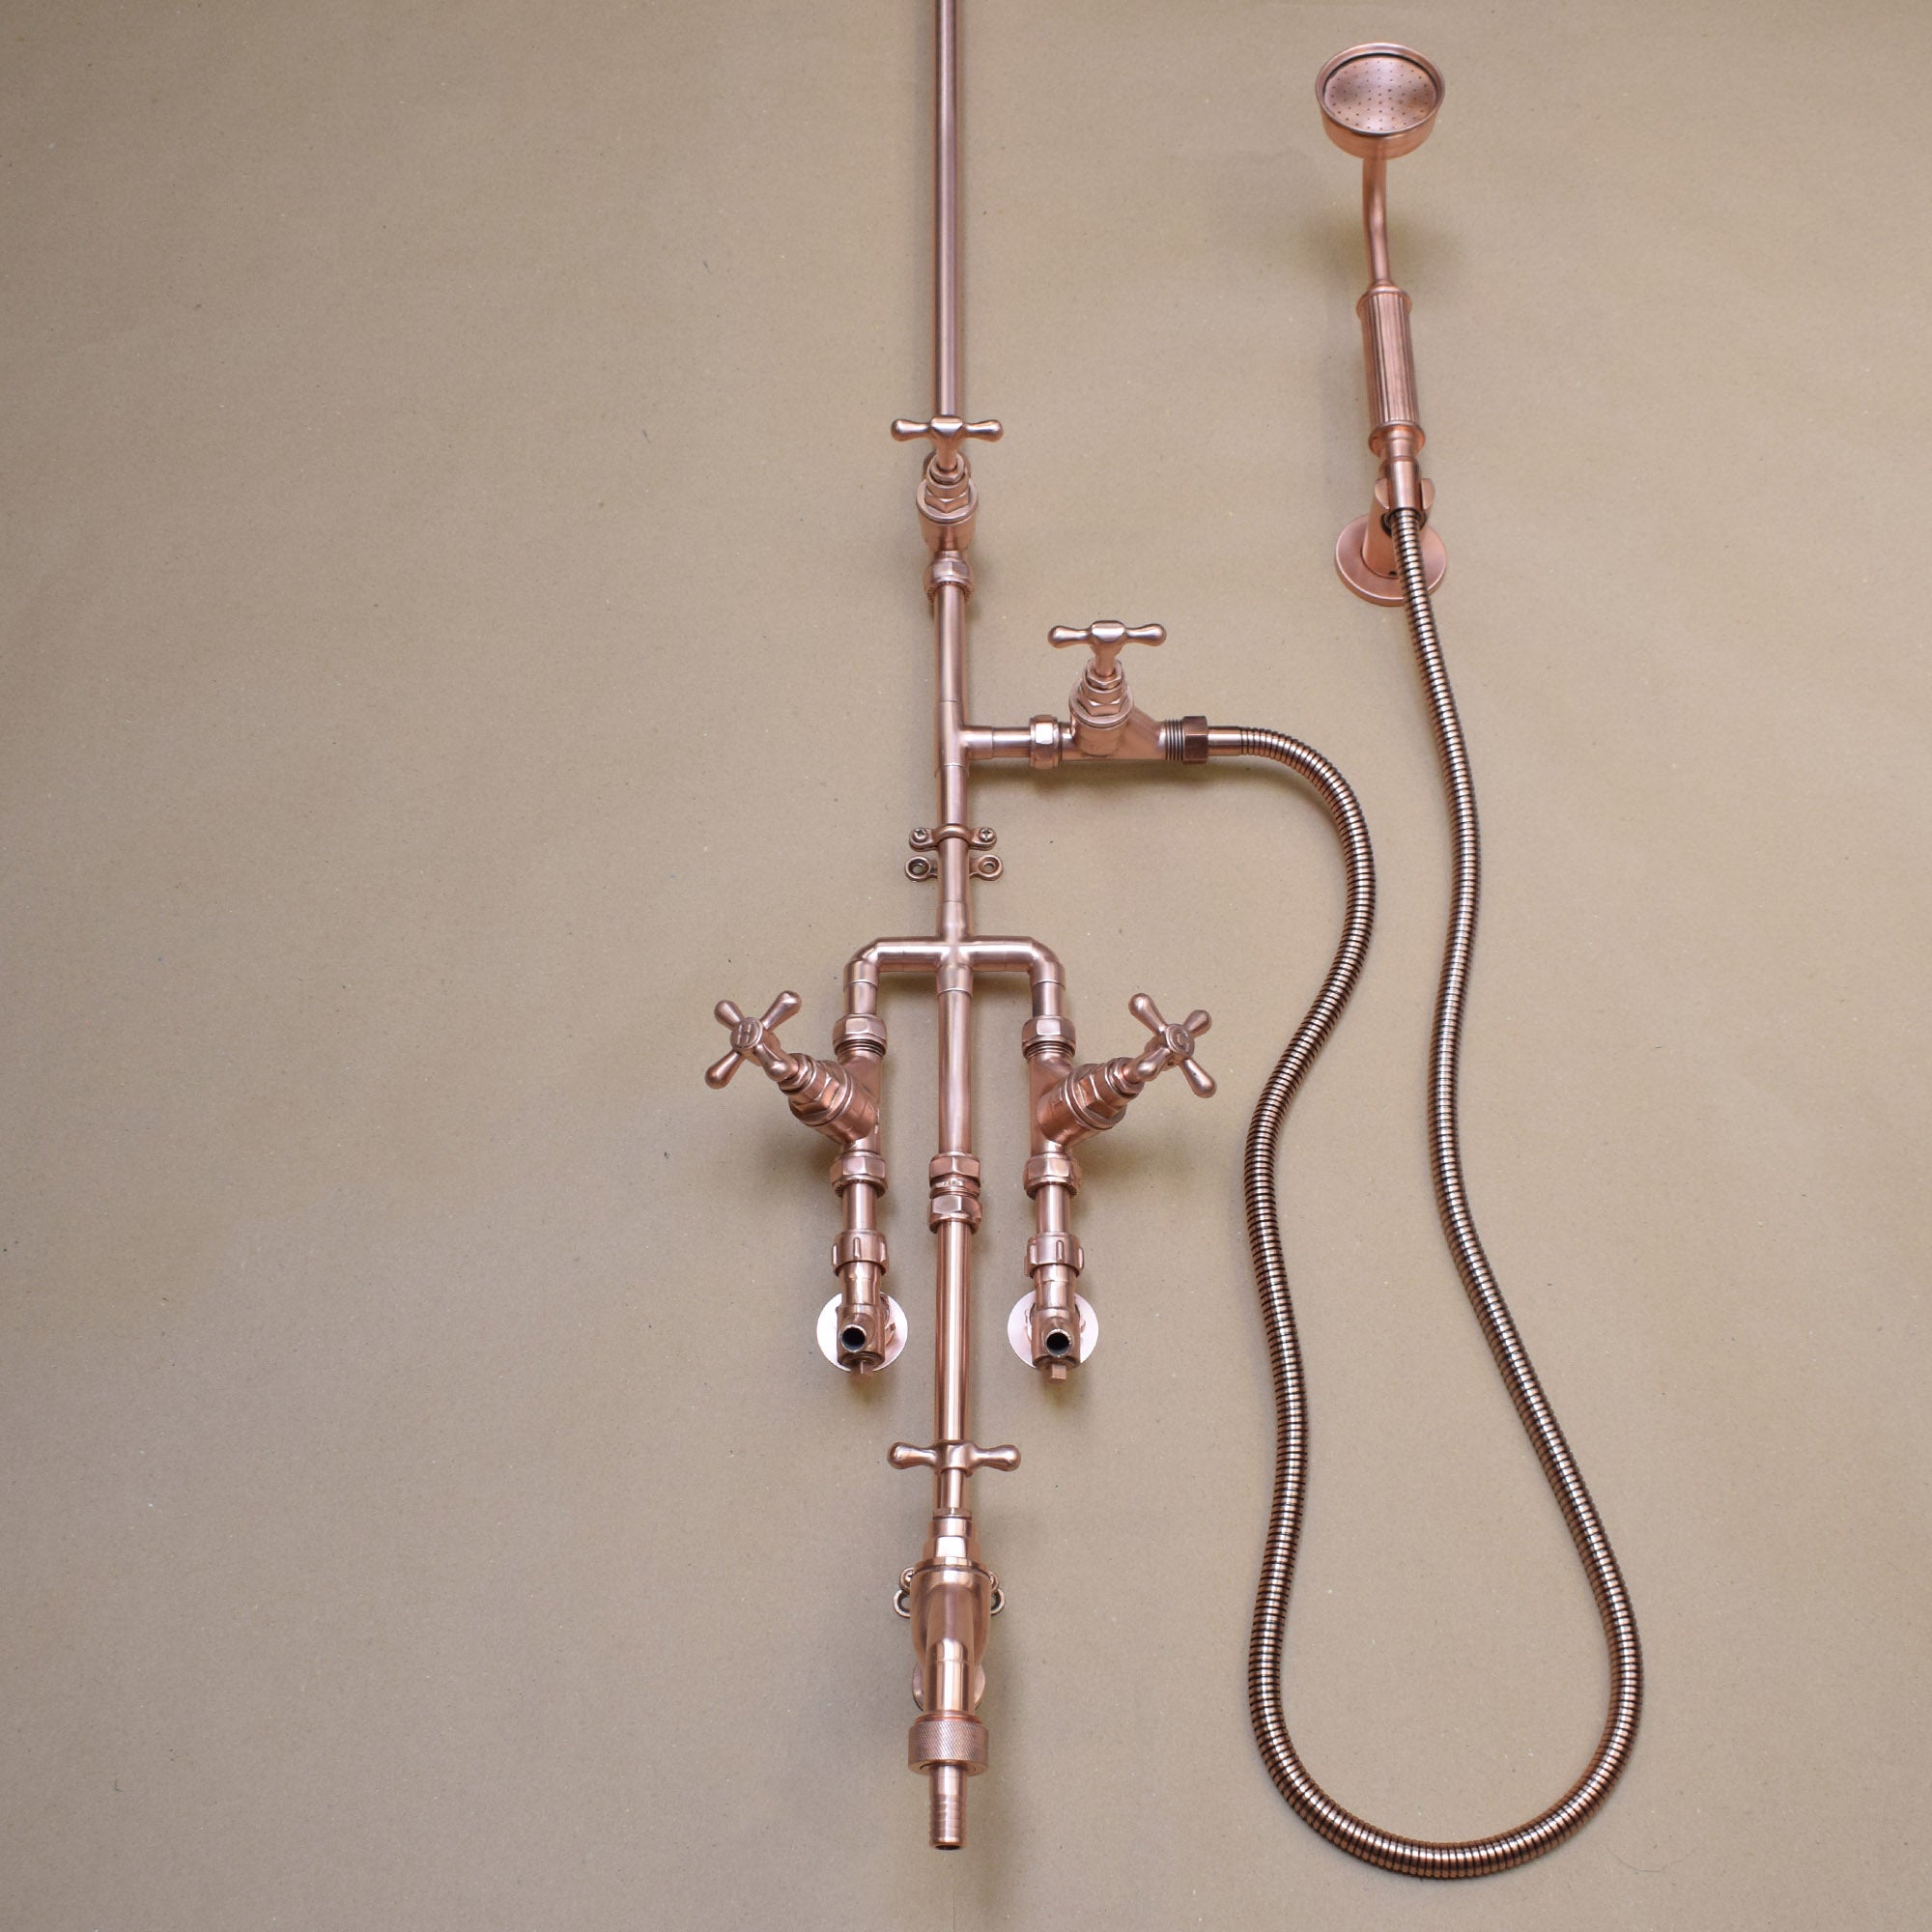 garden shower made from copper perfect for enhancing your outdoor oasis